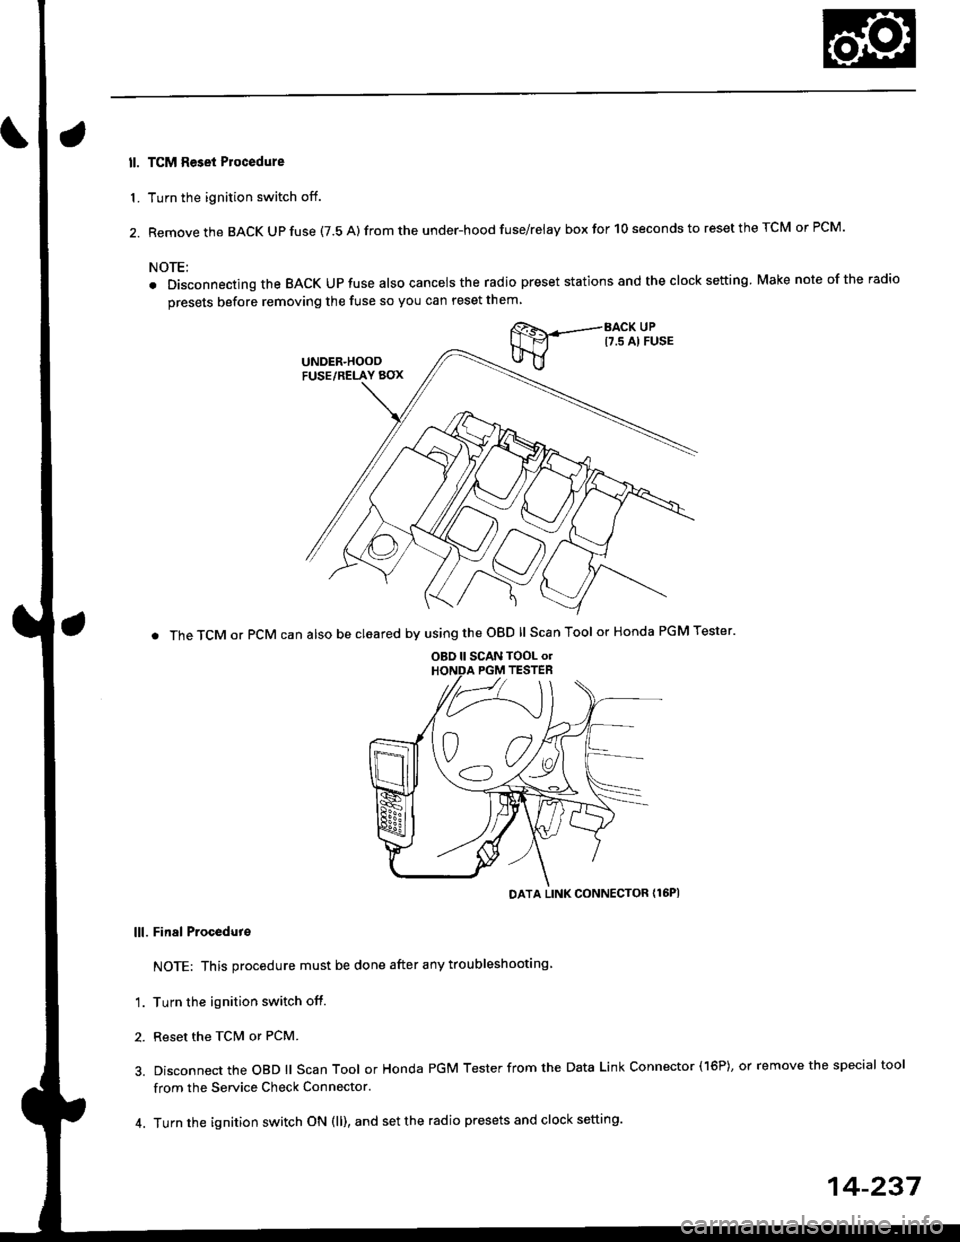 HONDA CIVIC 1997 6.G Owners Guide ll. TCM Reset Plocedure
1. Turn the ignition switch off.
2. Remove the BACK Up fuse (7.5 A) from the under-hood fuse/relay box for 10 seconds to reset the TCM or PCM.
NOTE:
. Disconnecting the BACK UP